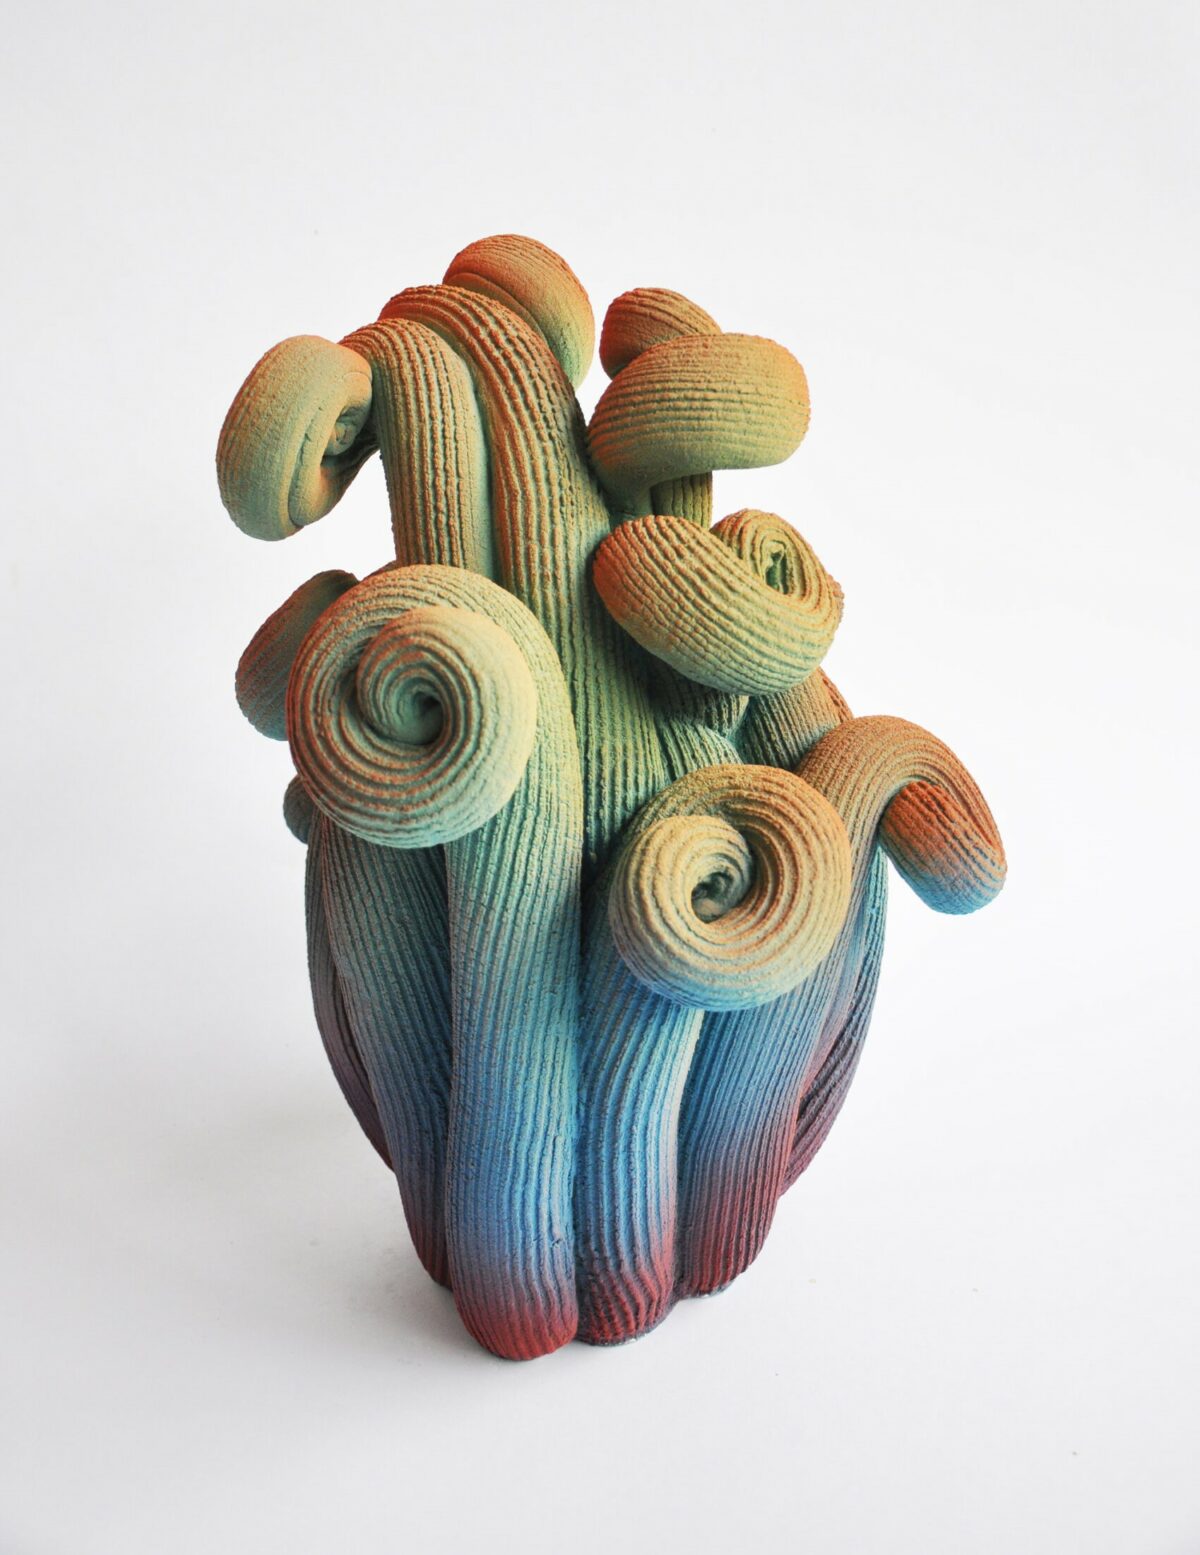 Mesmerizing Abstract Ceramic Sculptures Composed Of Multiples Loops Tentacles And Coils By Claire Lindner 1